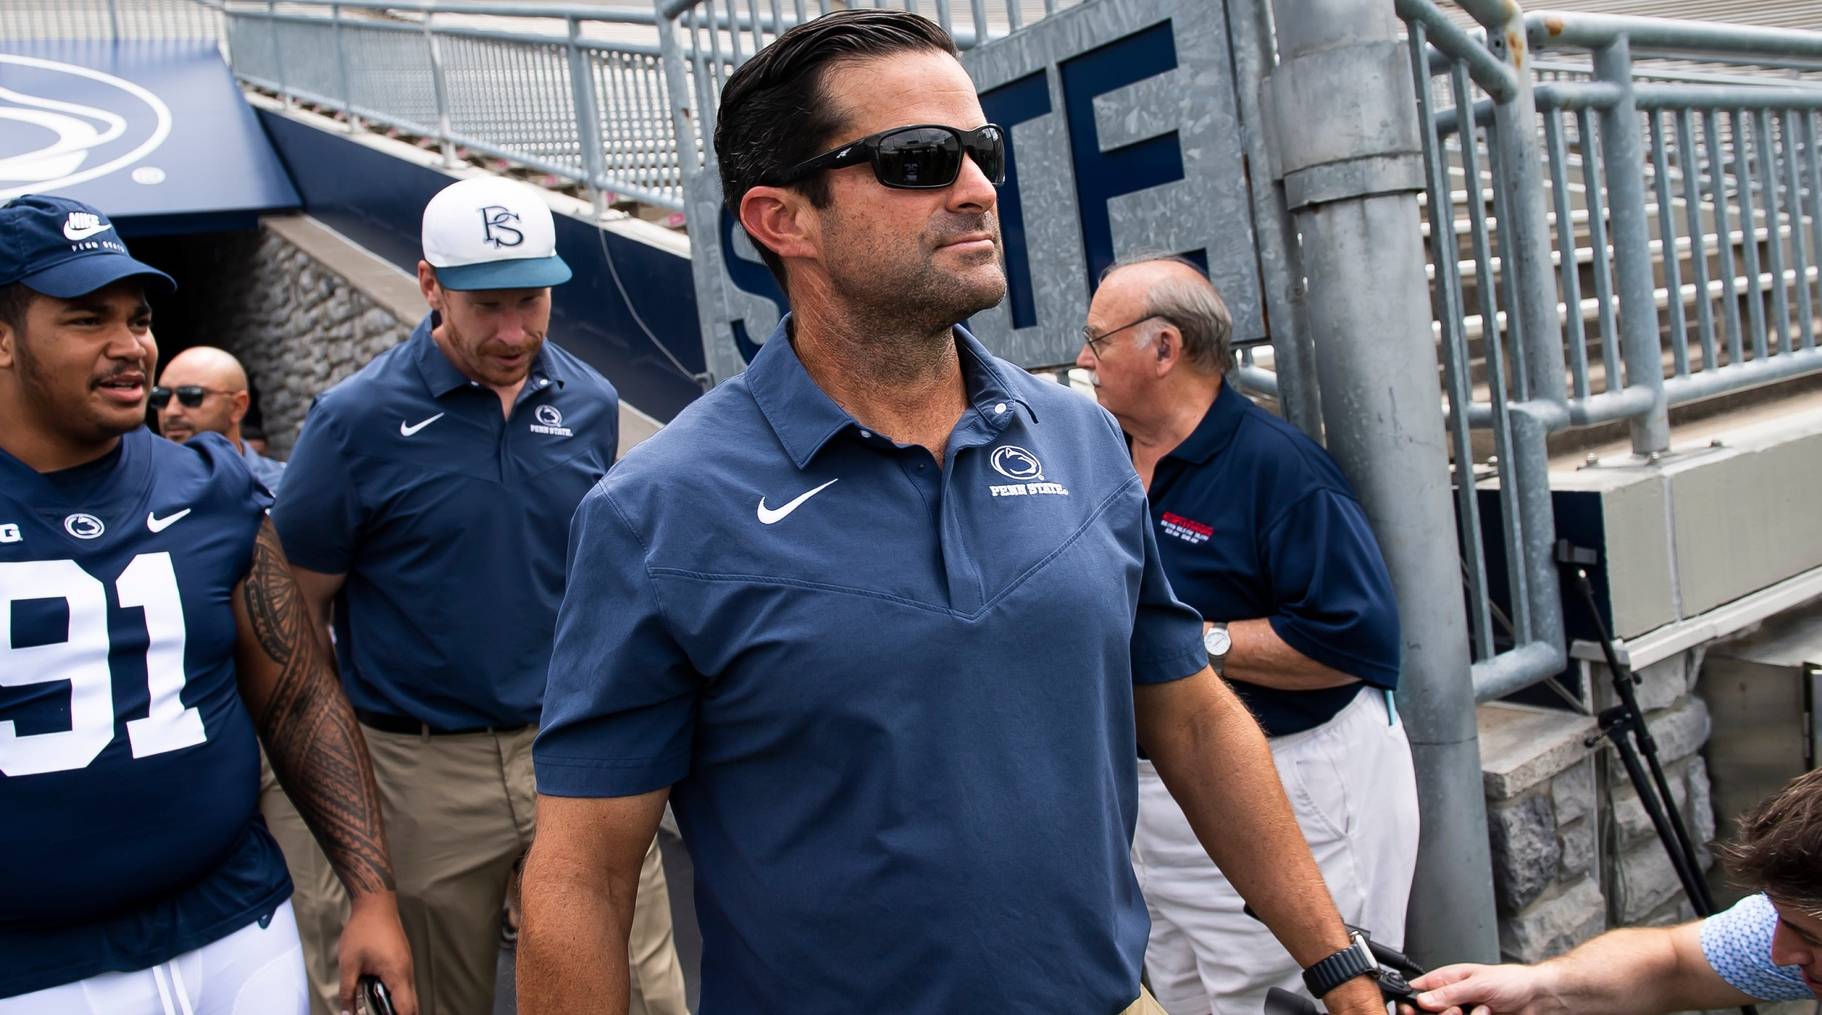 Penn State defensive coordinator Manny Diaz looks on while entering the field before a game.